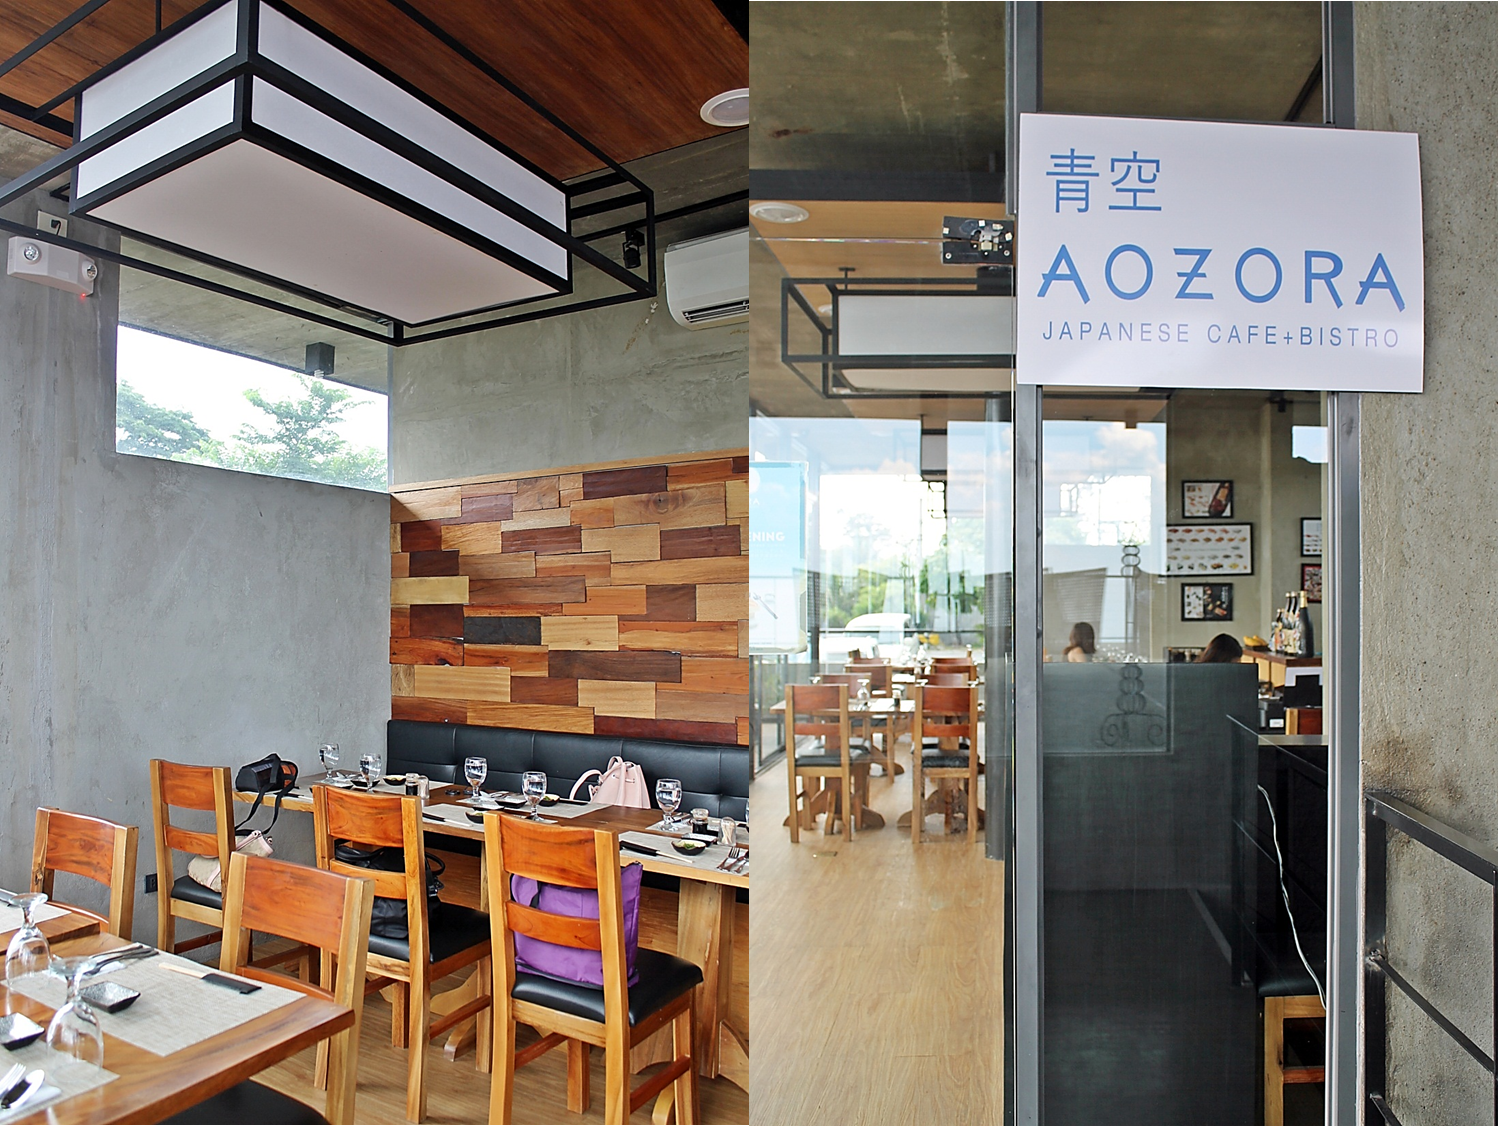 GASTRONOMY By Joy Aozora Japanese Cafe Bistro To Dine In The Clouds